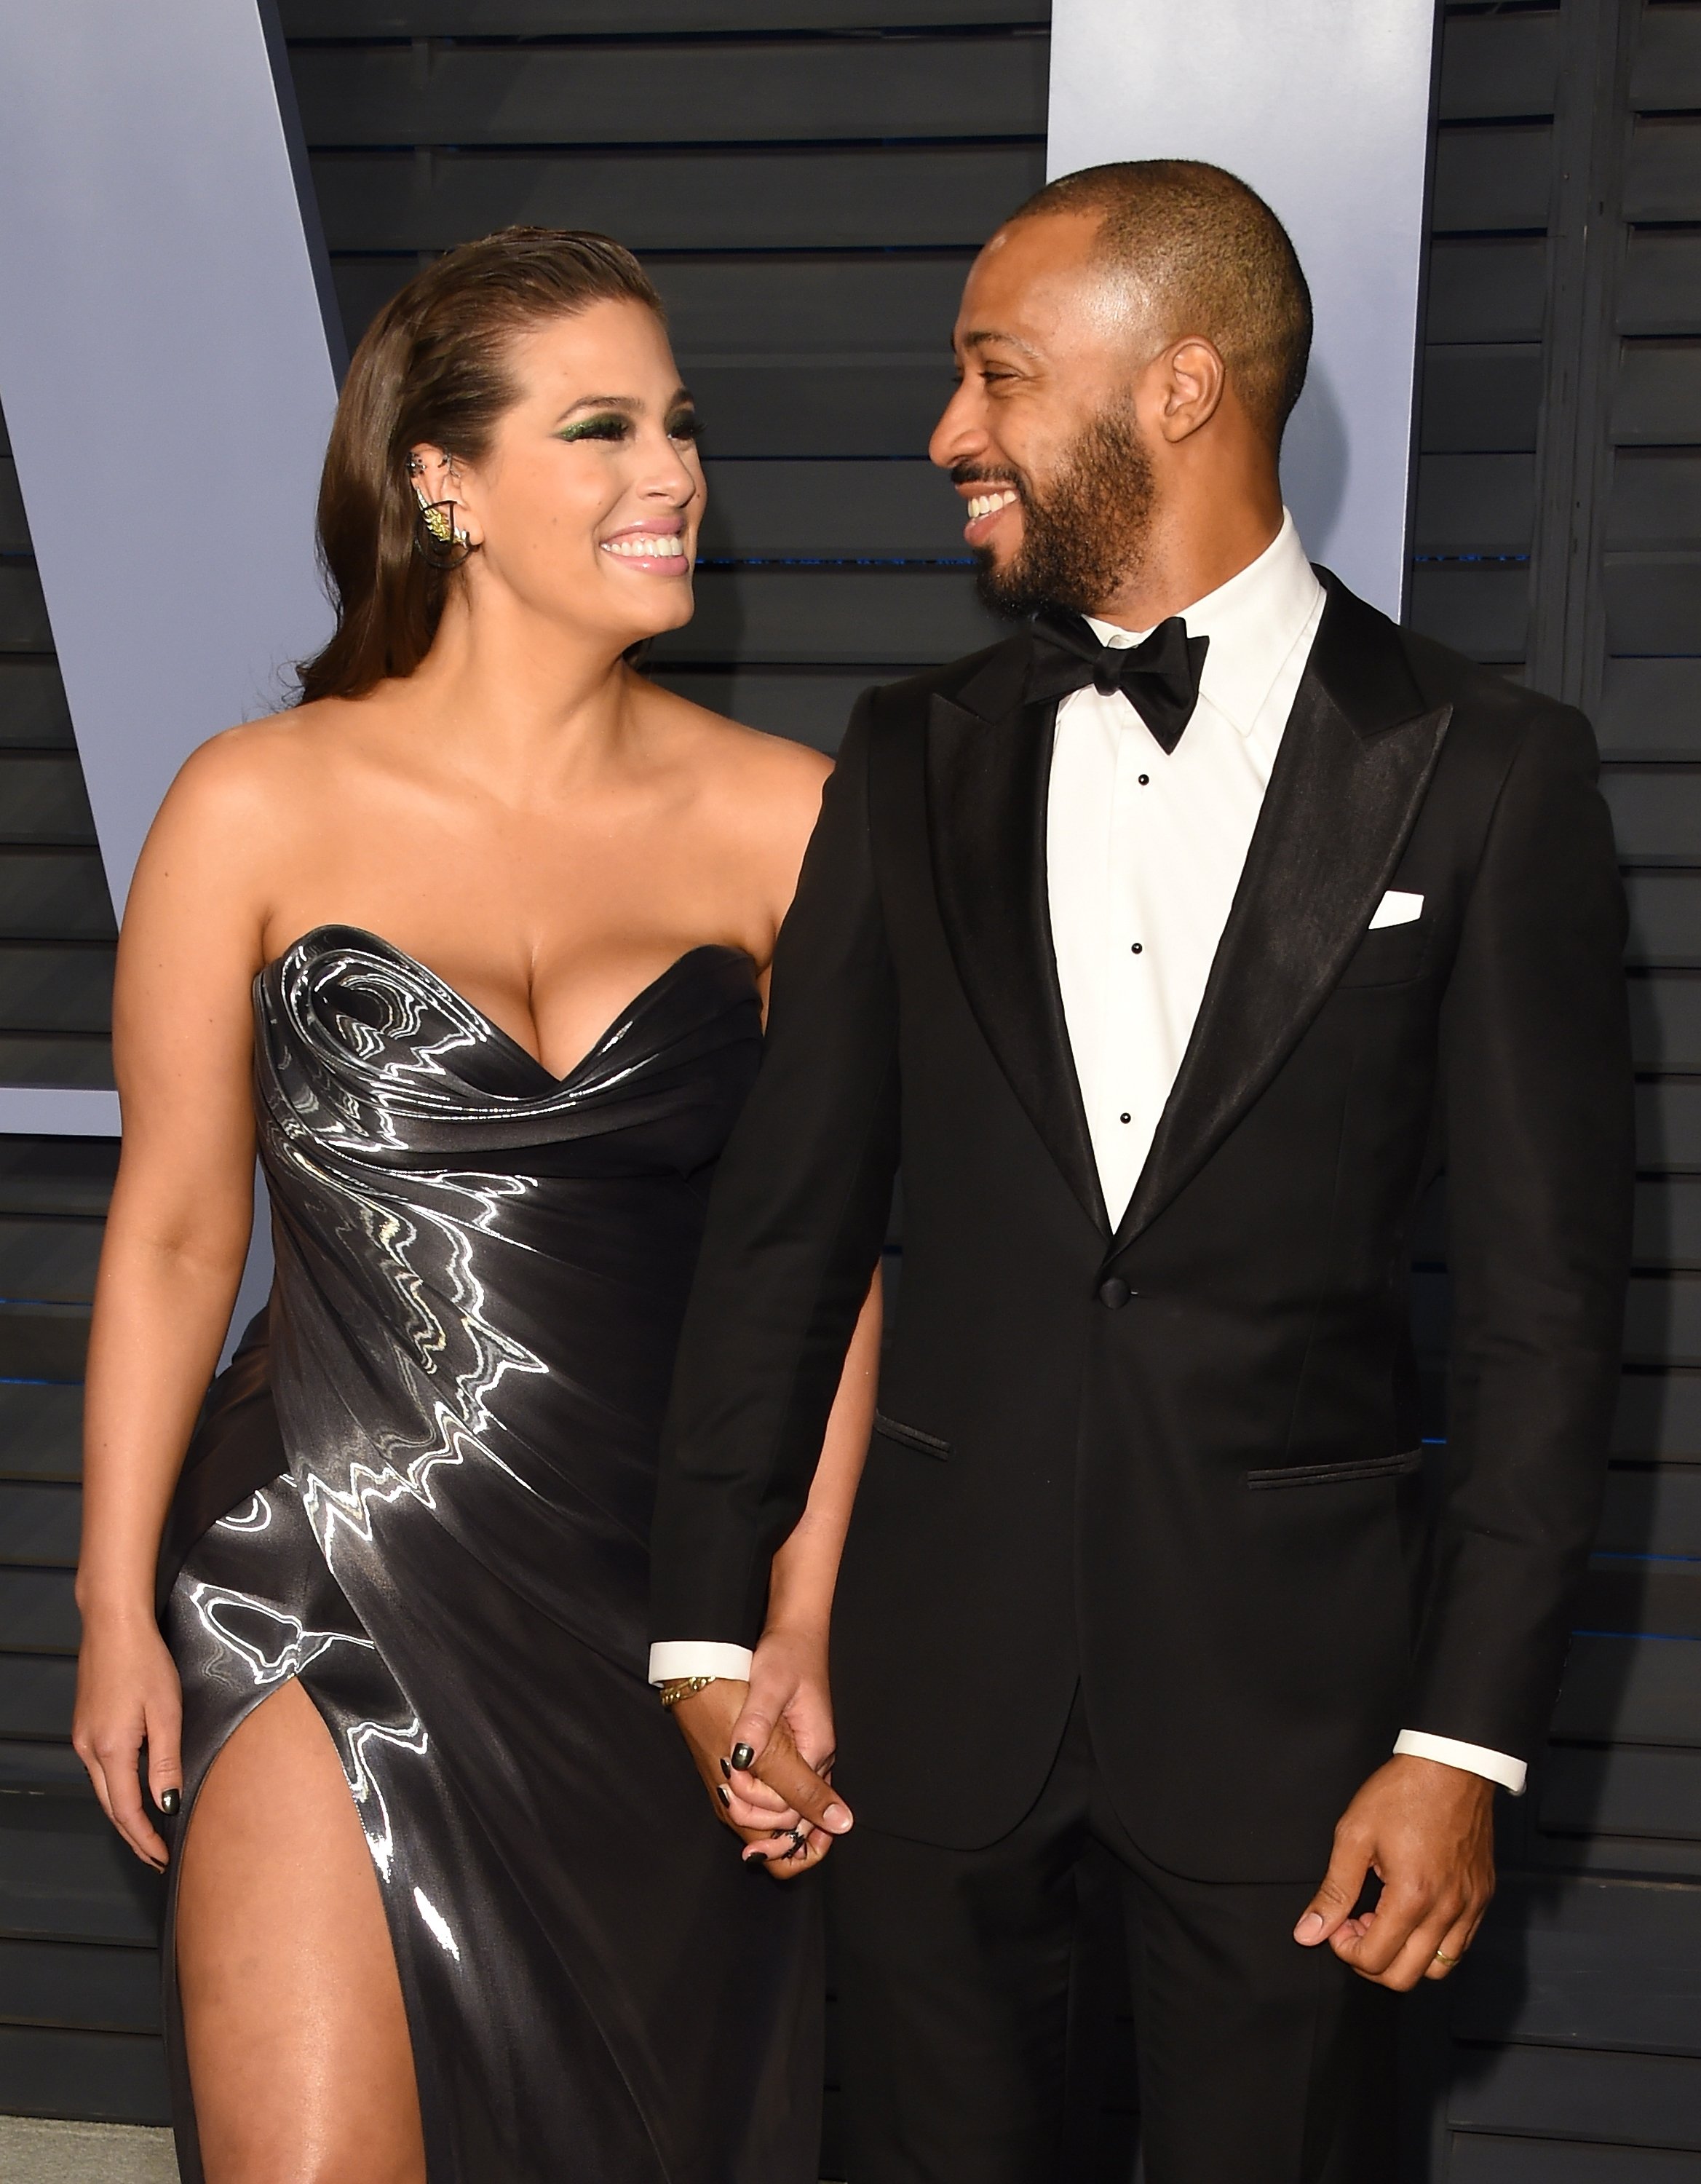 Ashley Graham and Justin Ervin attend the 2018 Vanity Fair Oscar Party at the Wallis Annenberg Center for the Performing Arts on March 4, 2018 | Photo: Getty Images